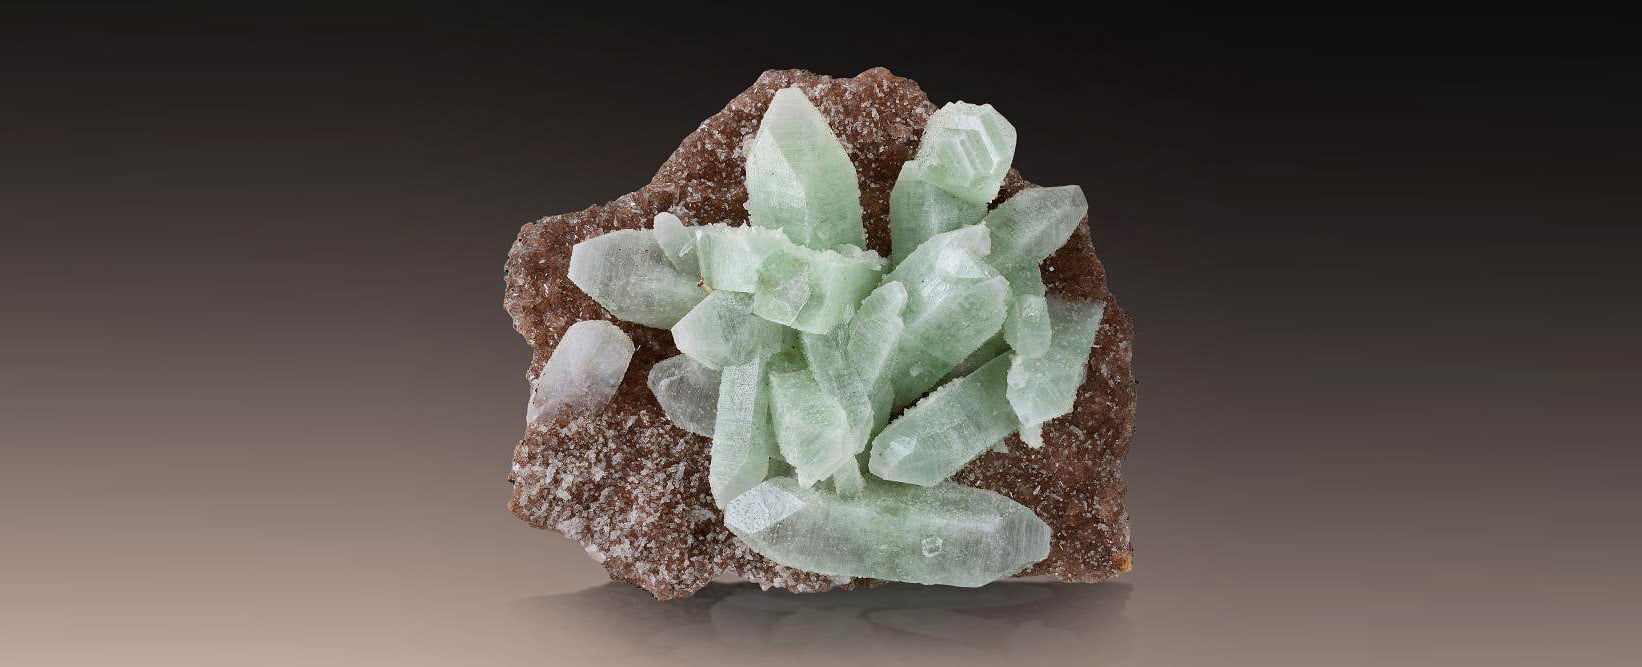 Apophyllite Meaning and Properties 1